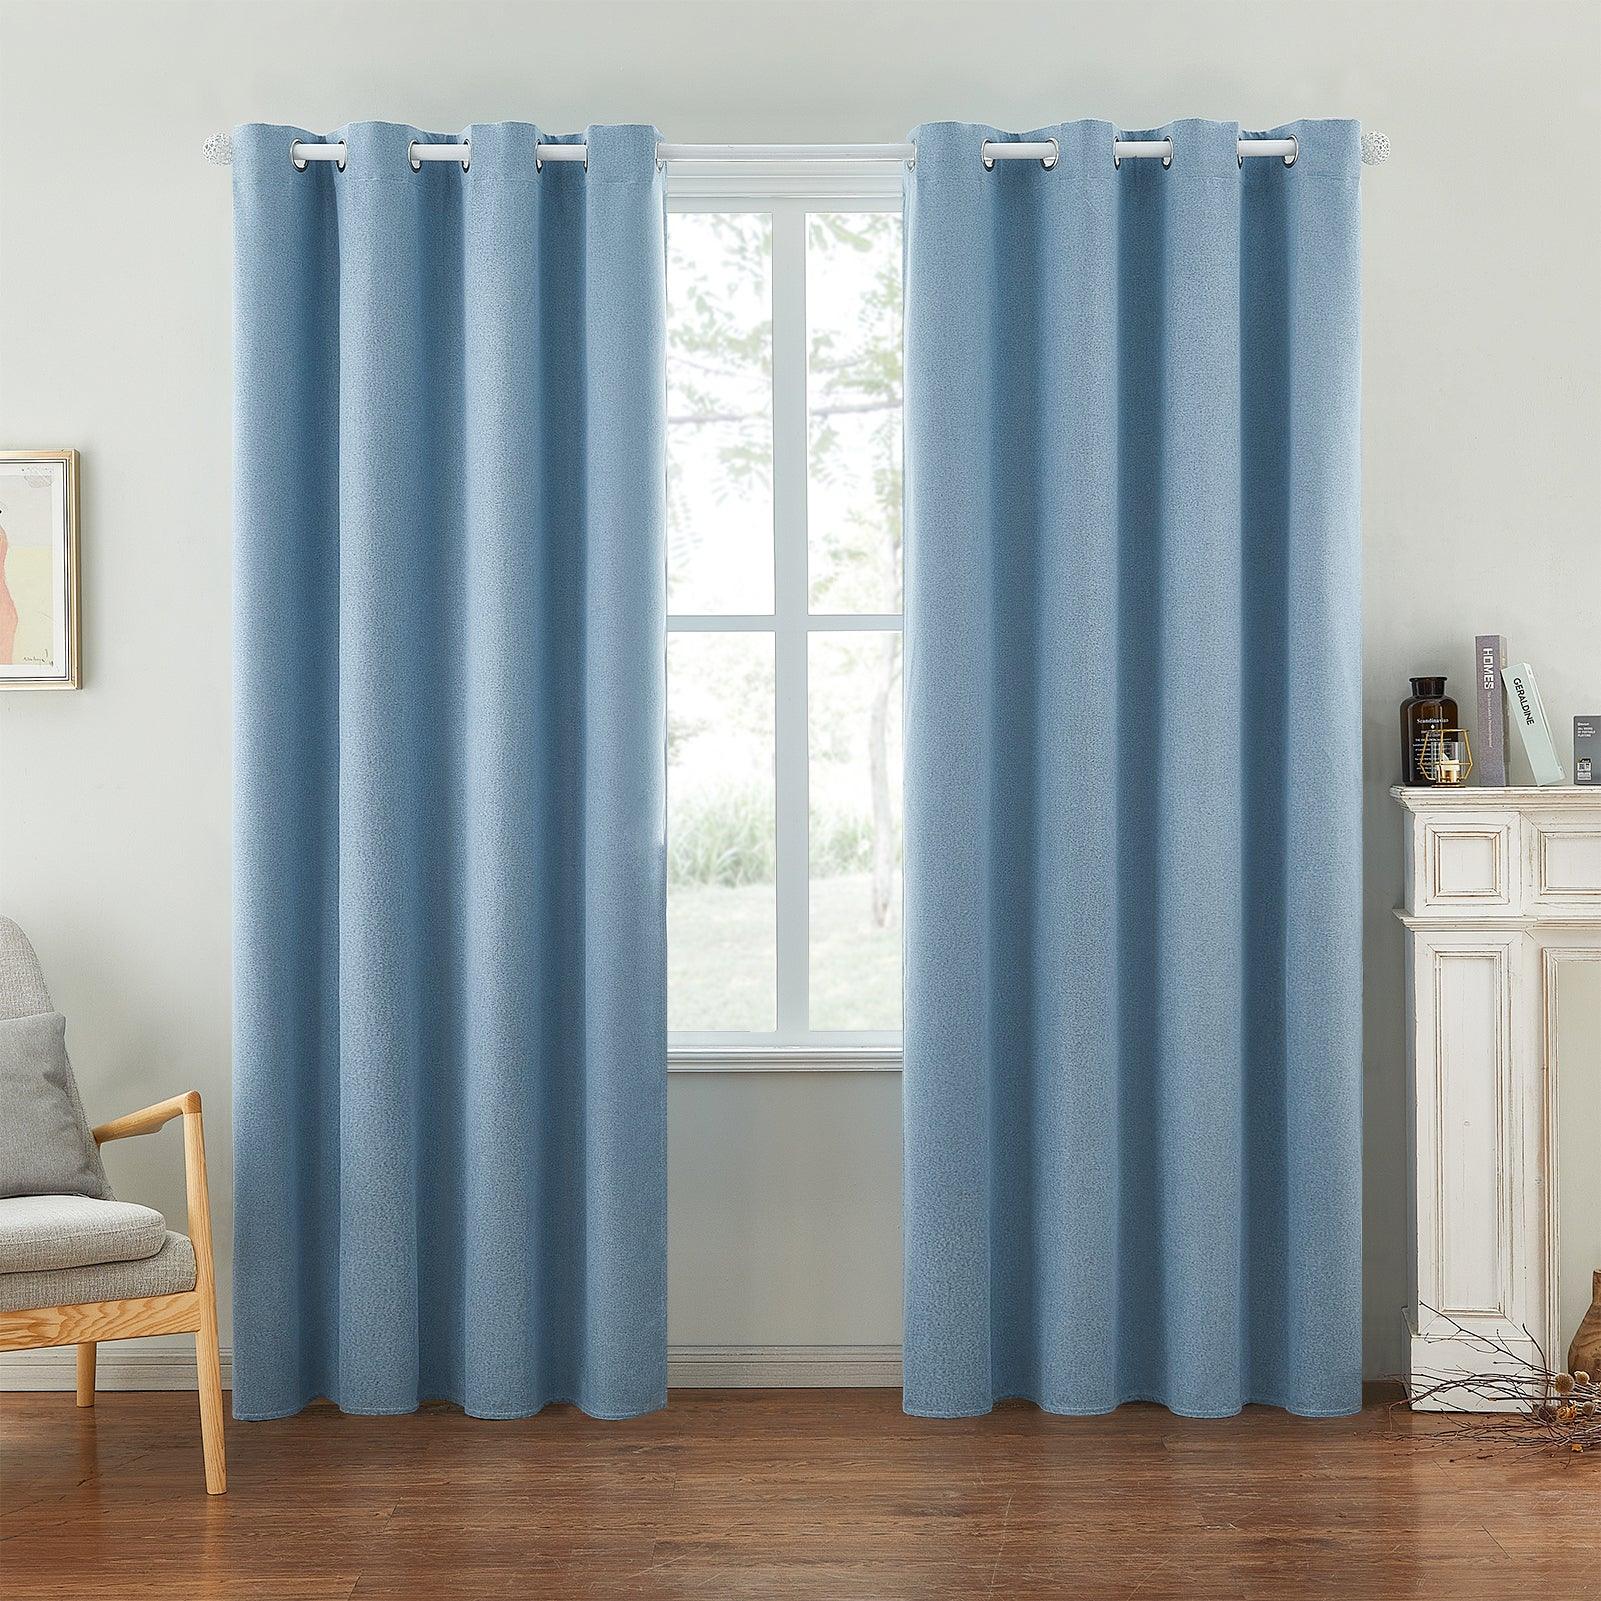 Custom Size -Modern Solid Thermal Insulated Window Treatment Blackout Drapes For Bedroom With Eyelets,1 Panel - Topfinel